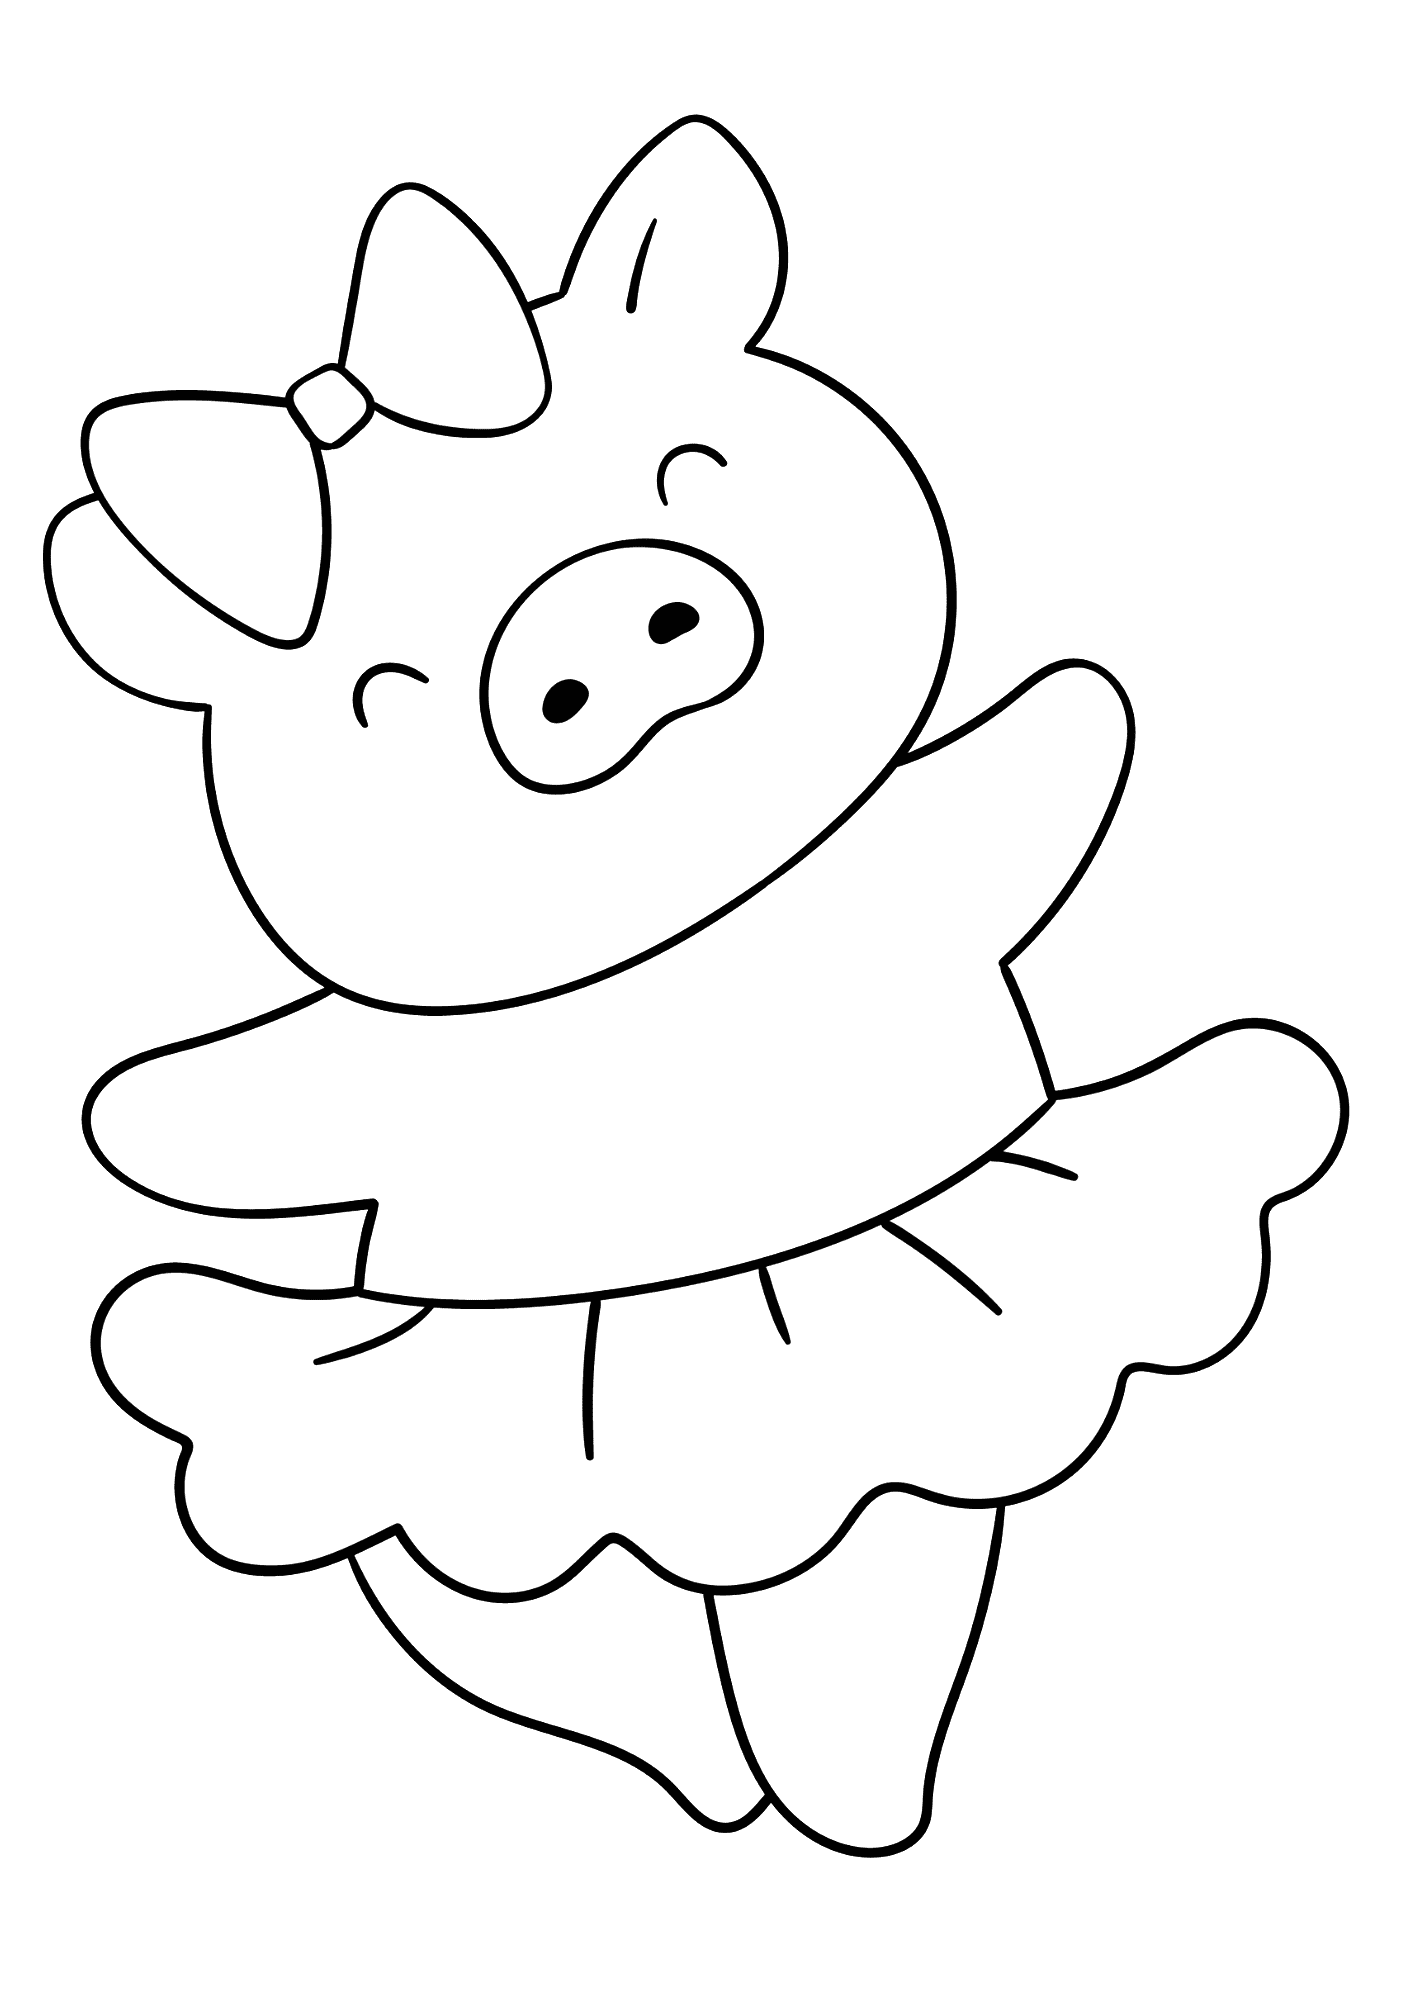 Pretty Pig Coloring Page